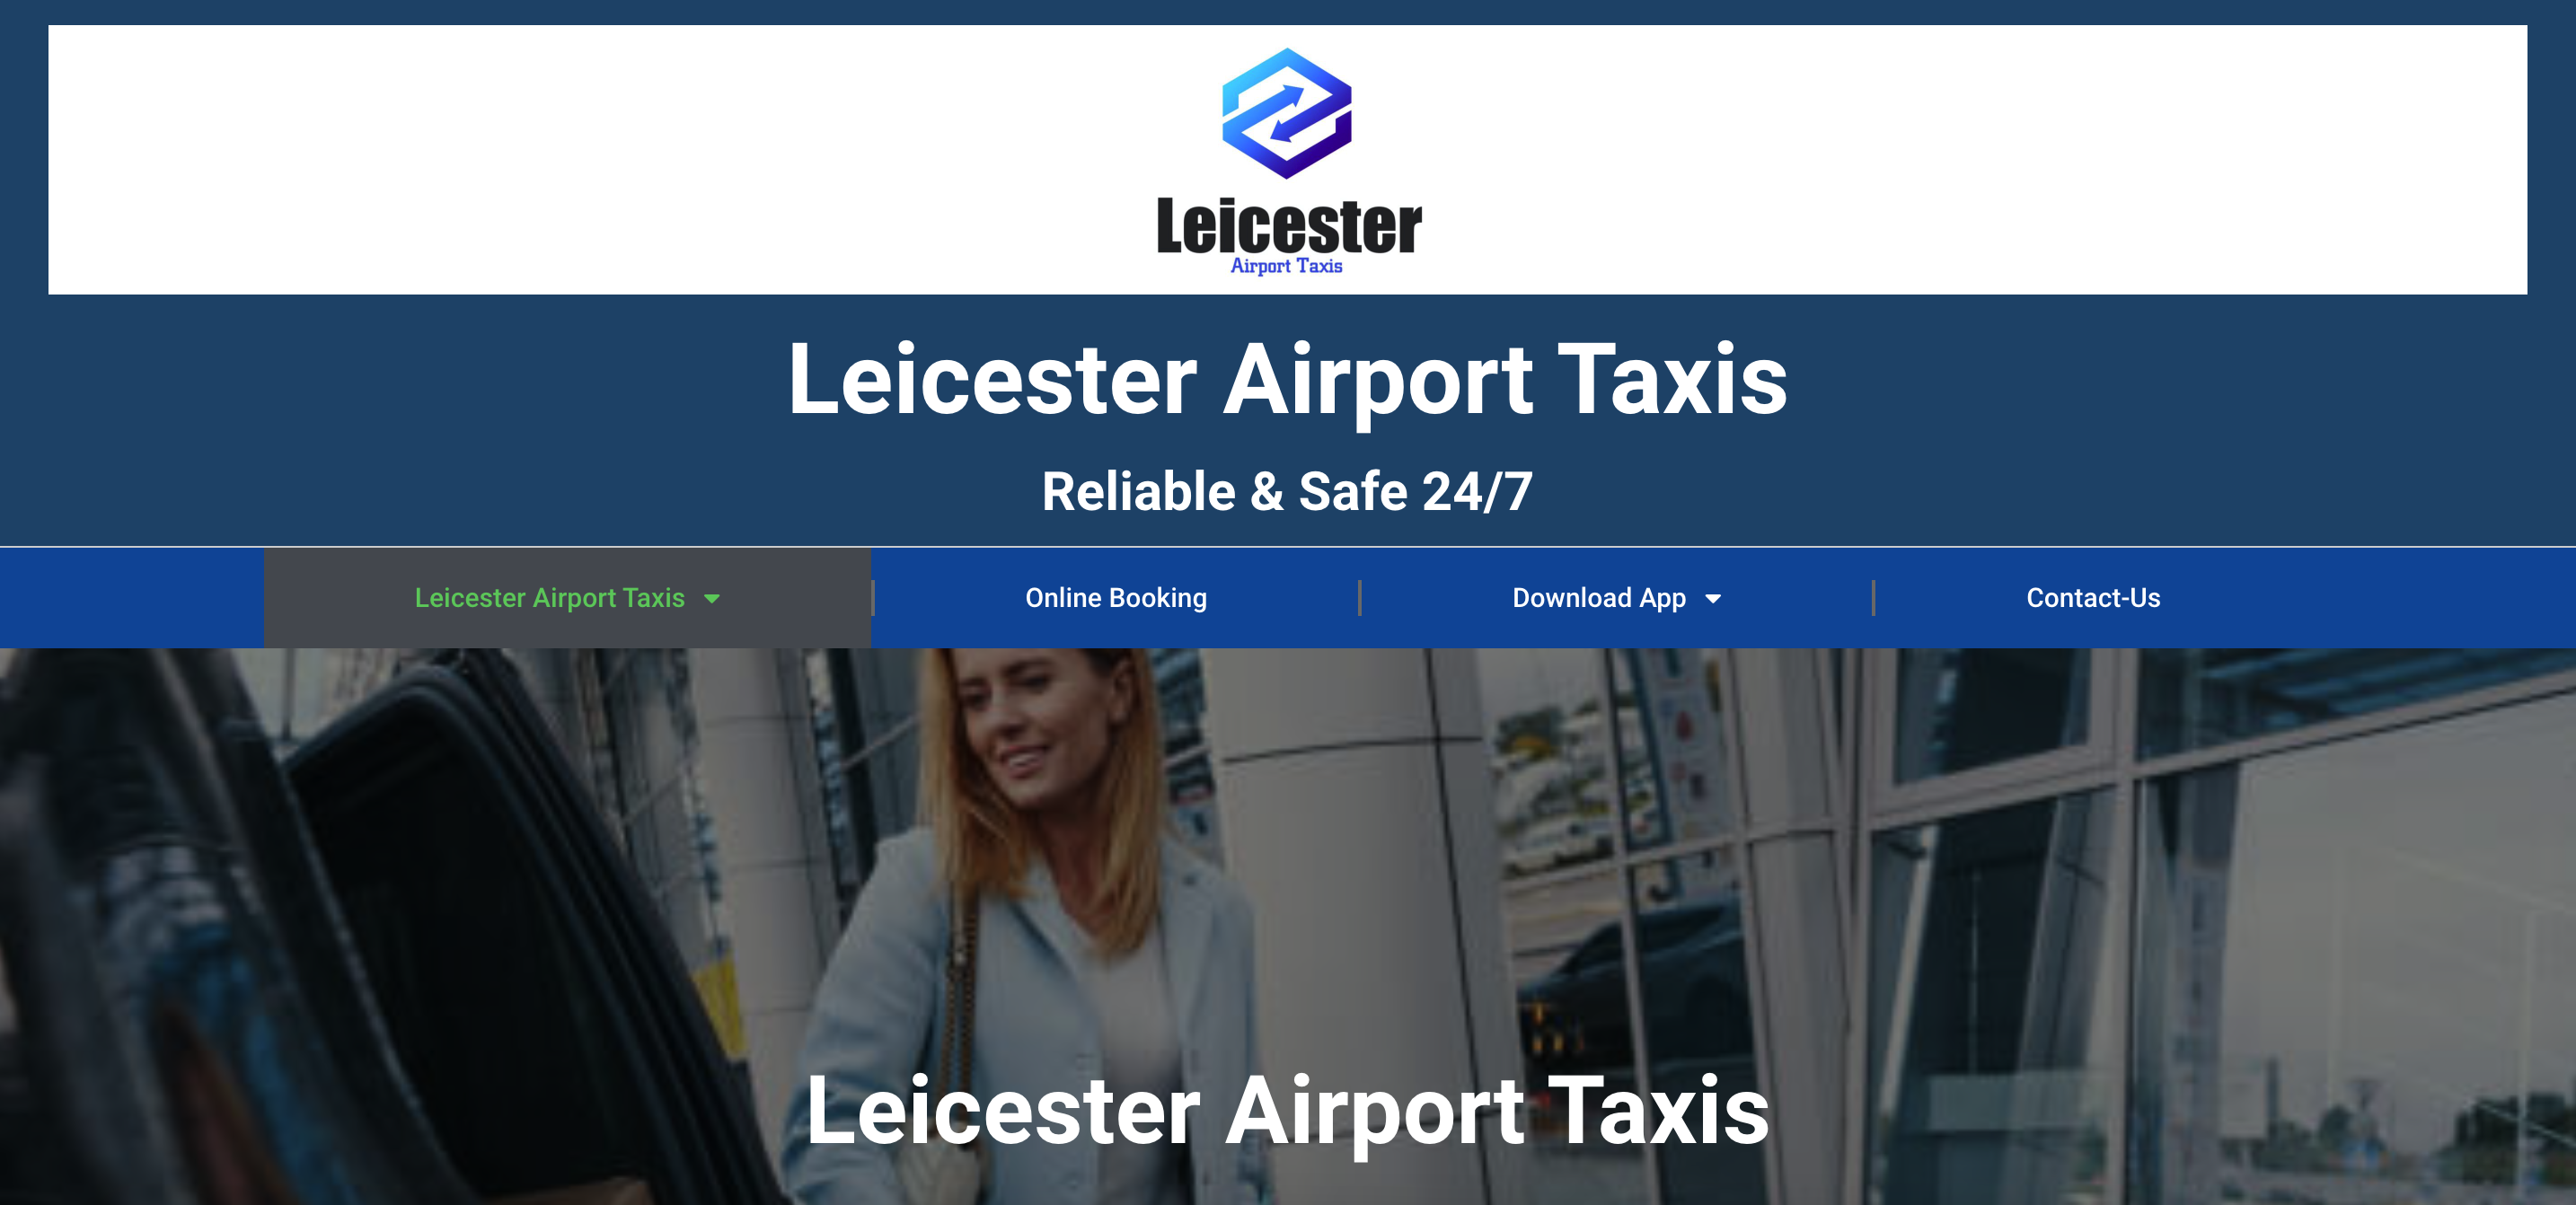 Leicester Airport Taxi app partner